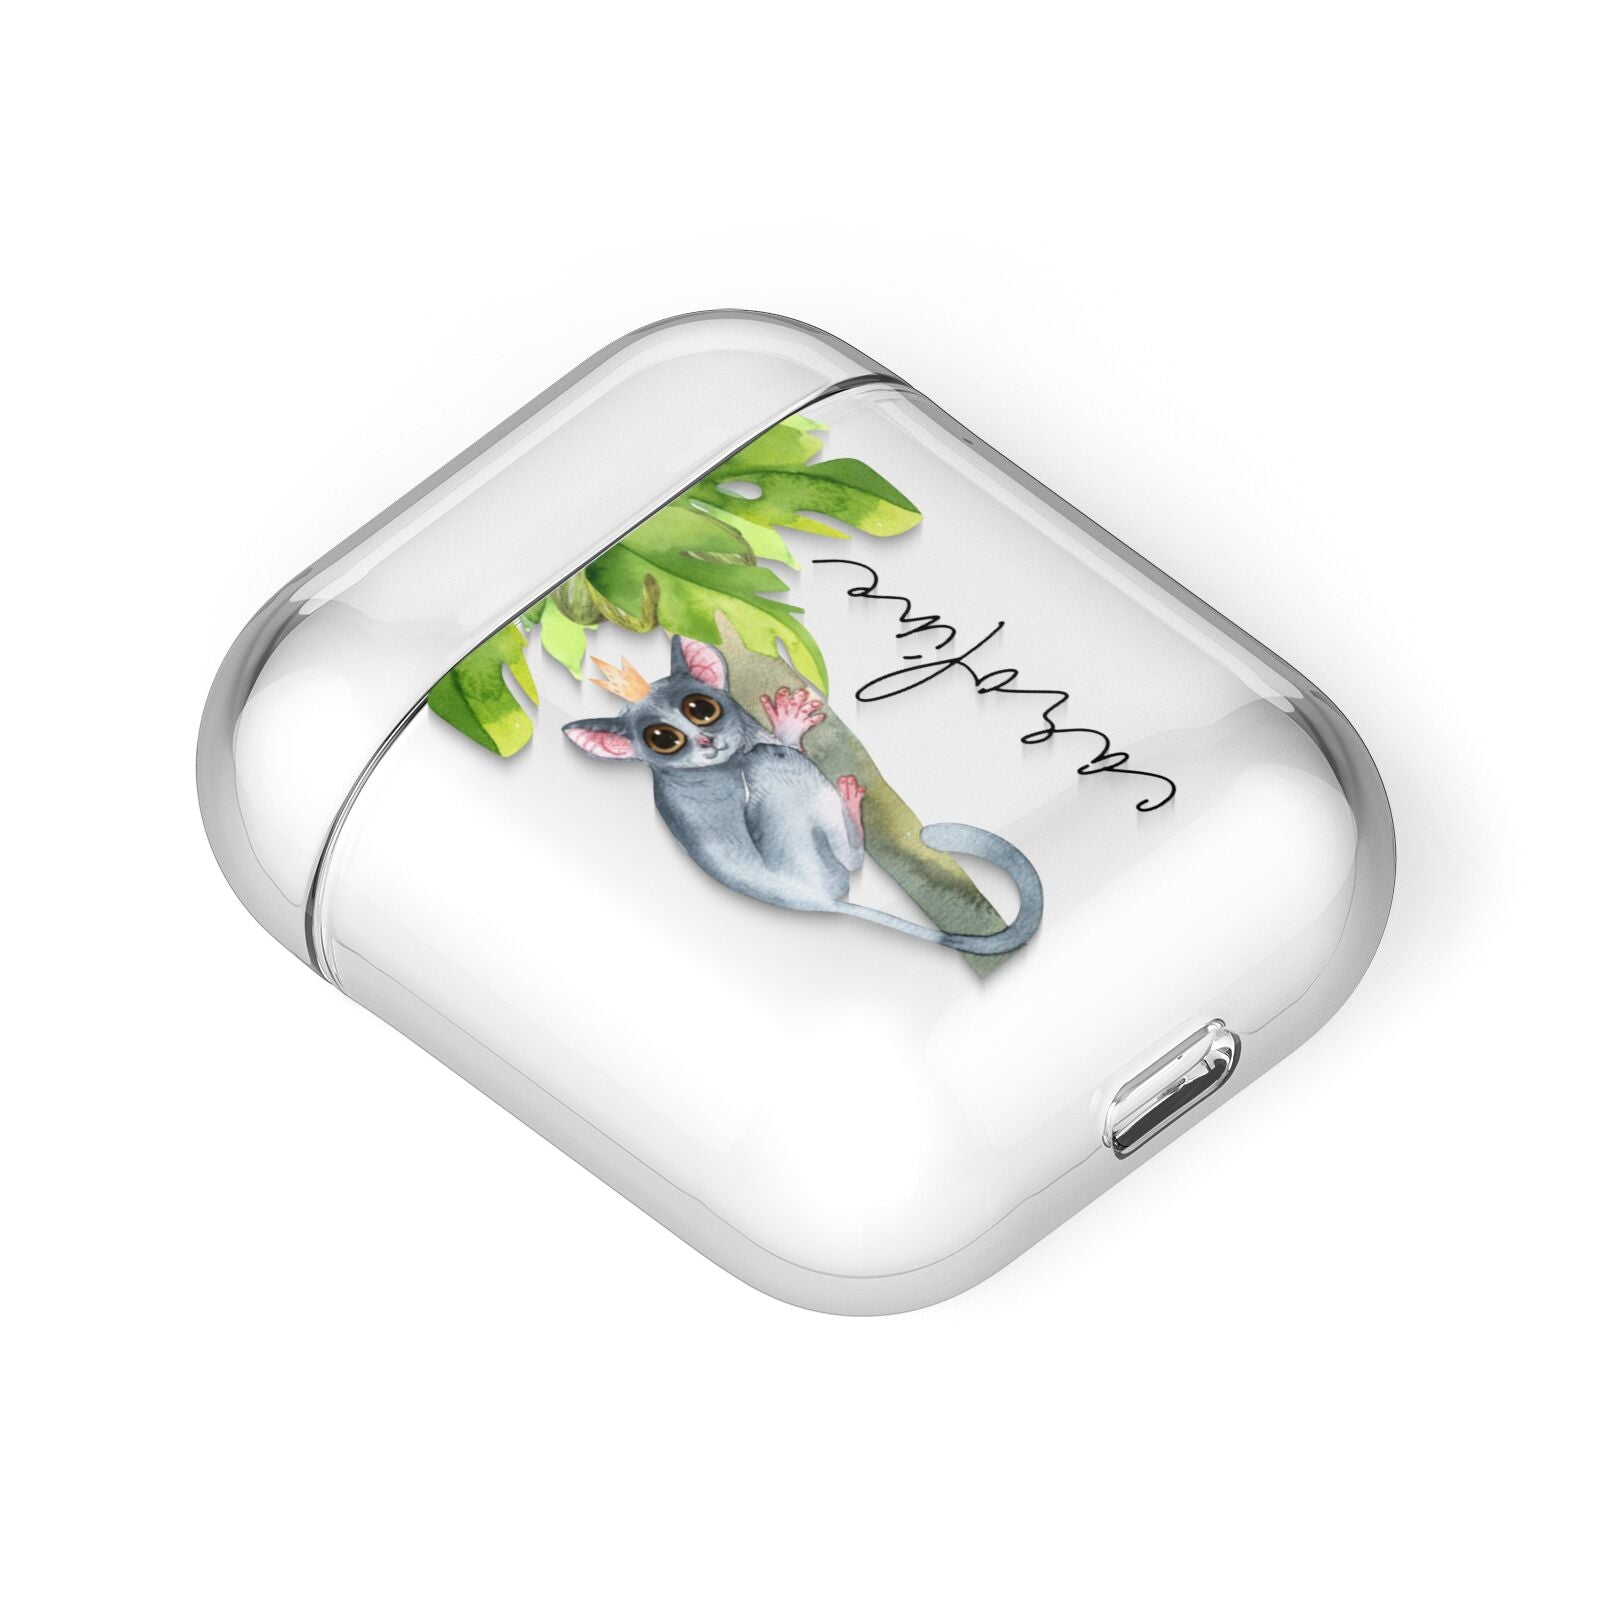 Personalised Galago AirPods Case Laid Flat